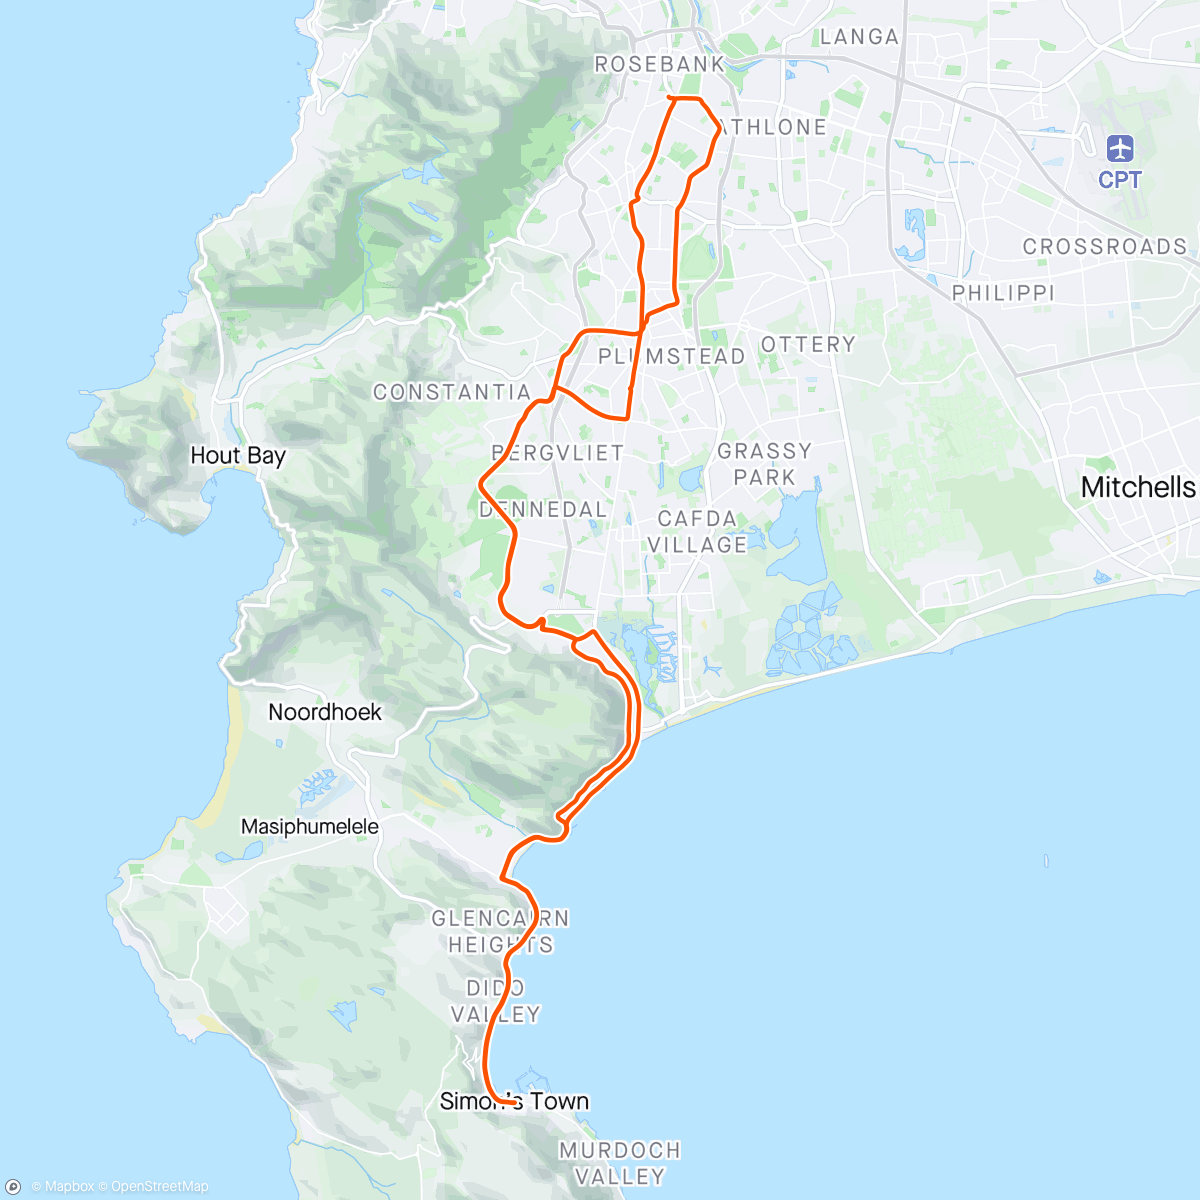 Mapa de la actividad, Morning Ride - last of the last with the CTG crew 🤗, going to miss this for the next few weeks but there is a bigger journey ahead